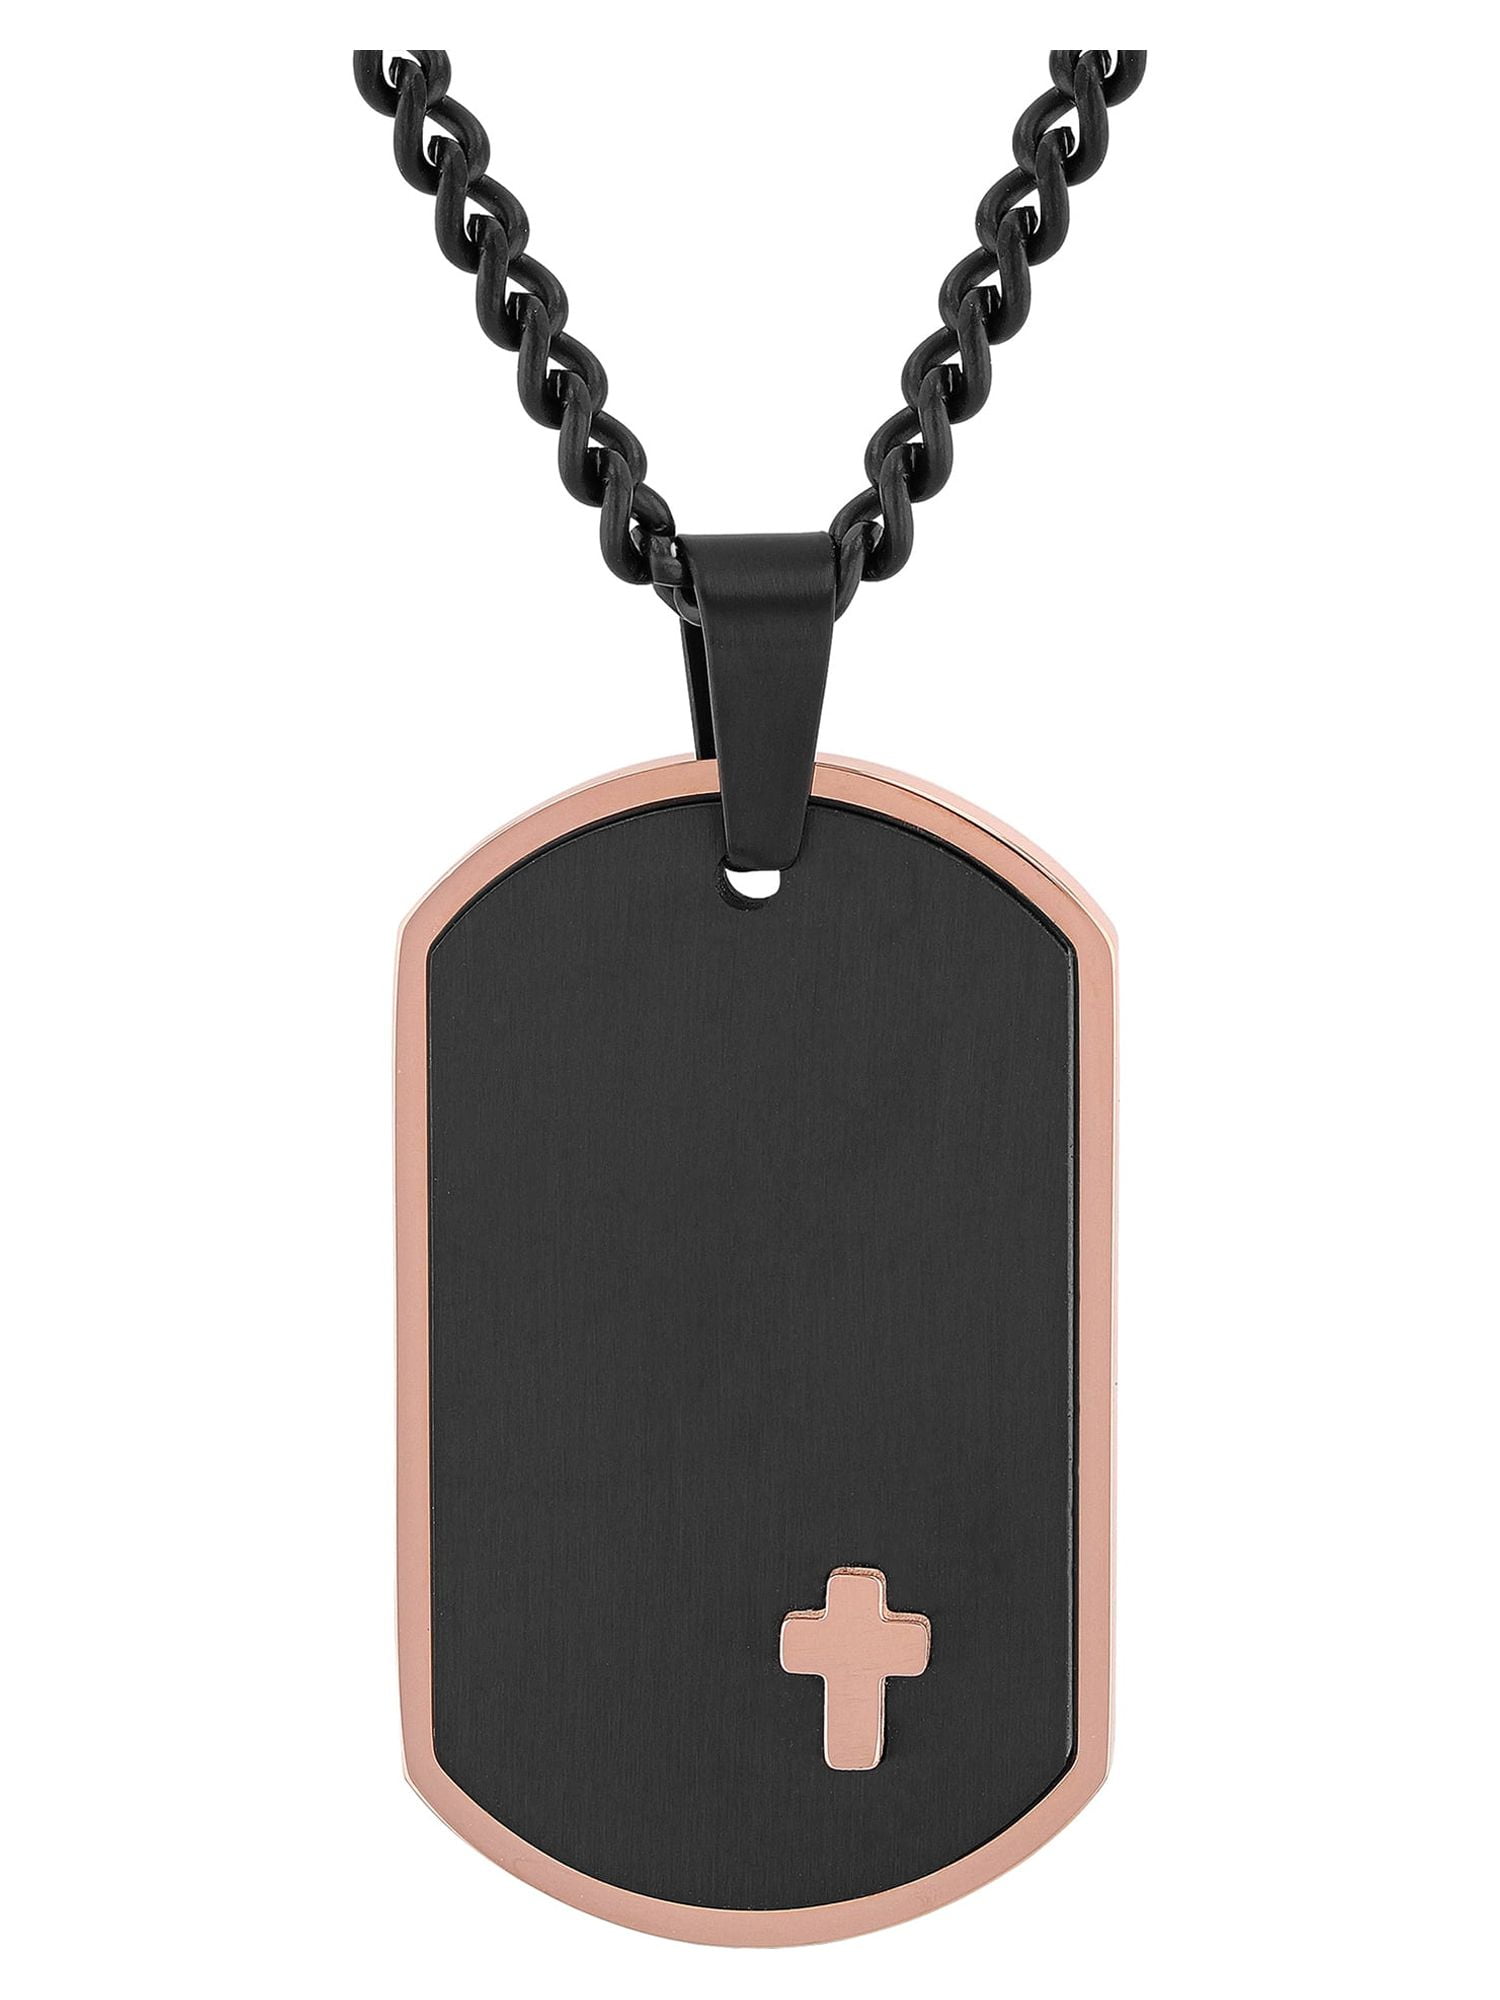 Mens Gold Stainless Steel Engravable Dog Tag Pendant Necklace